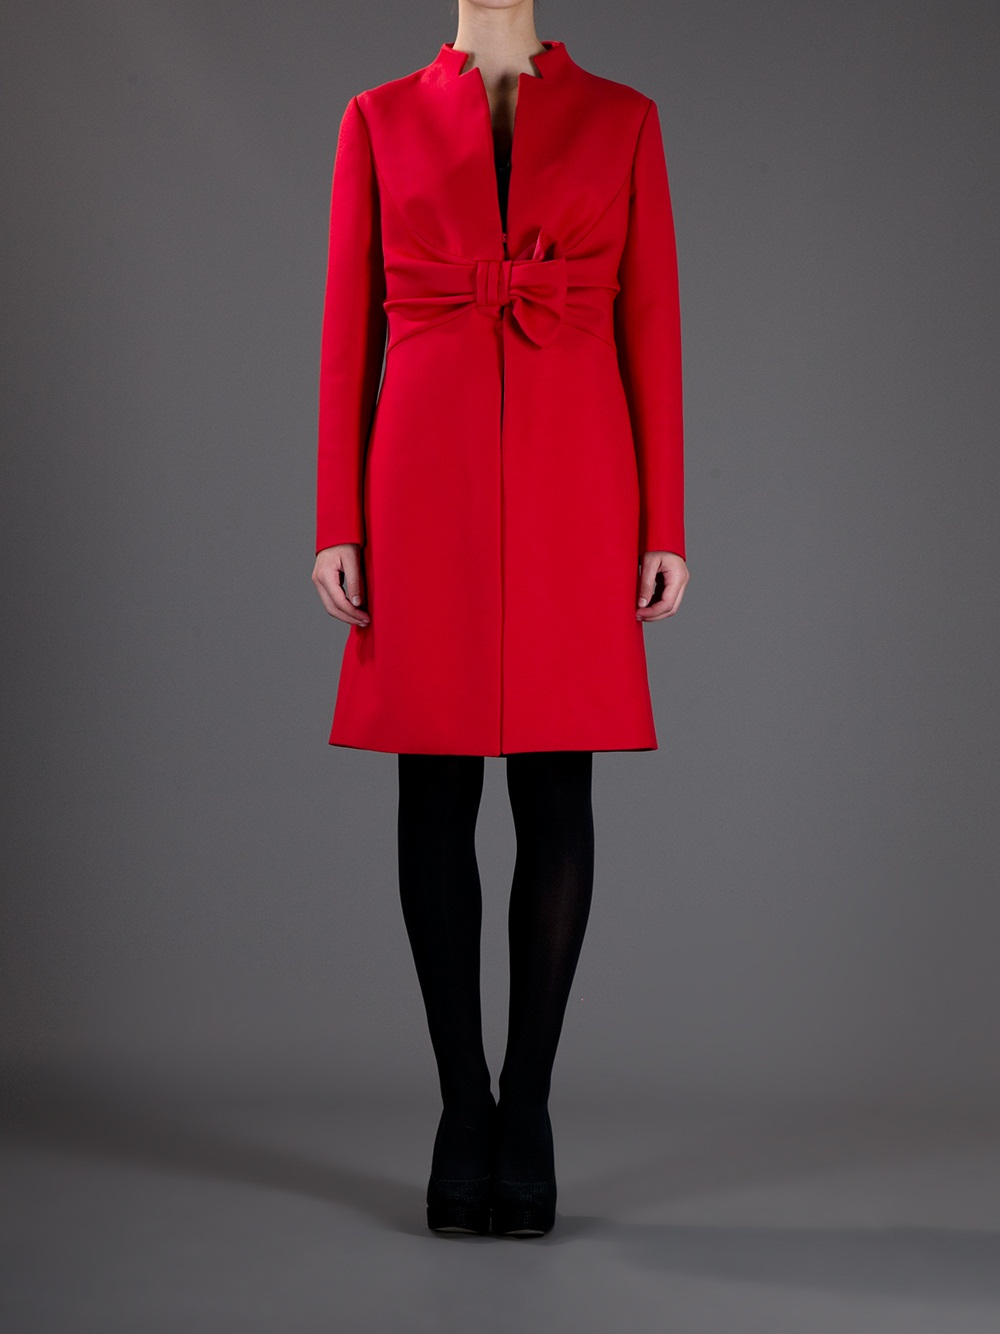 Lyst - Valentino Bow Coat in Red